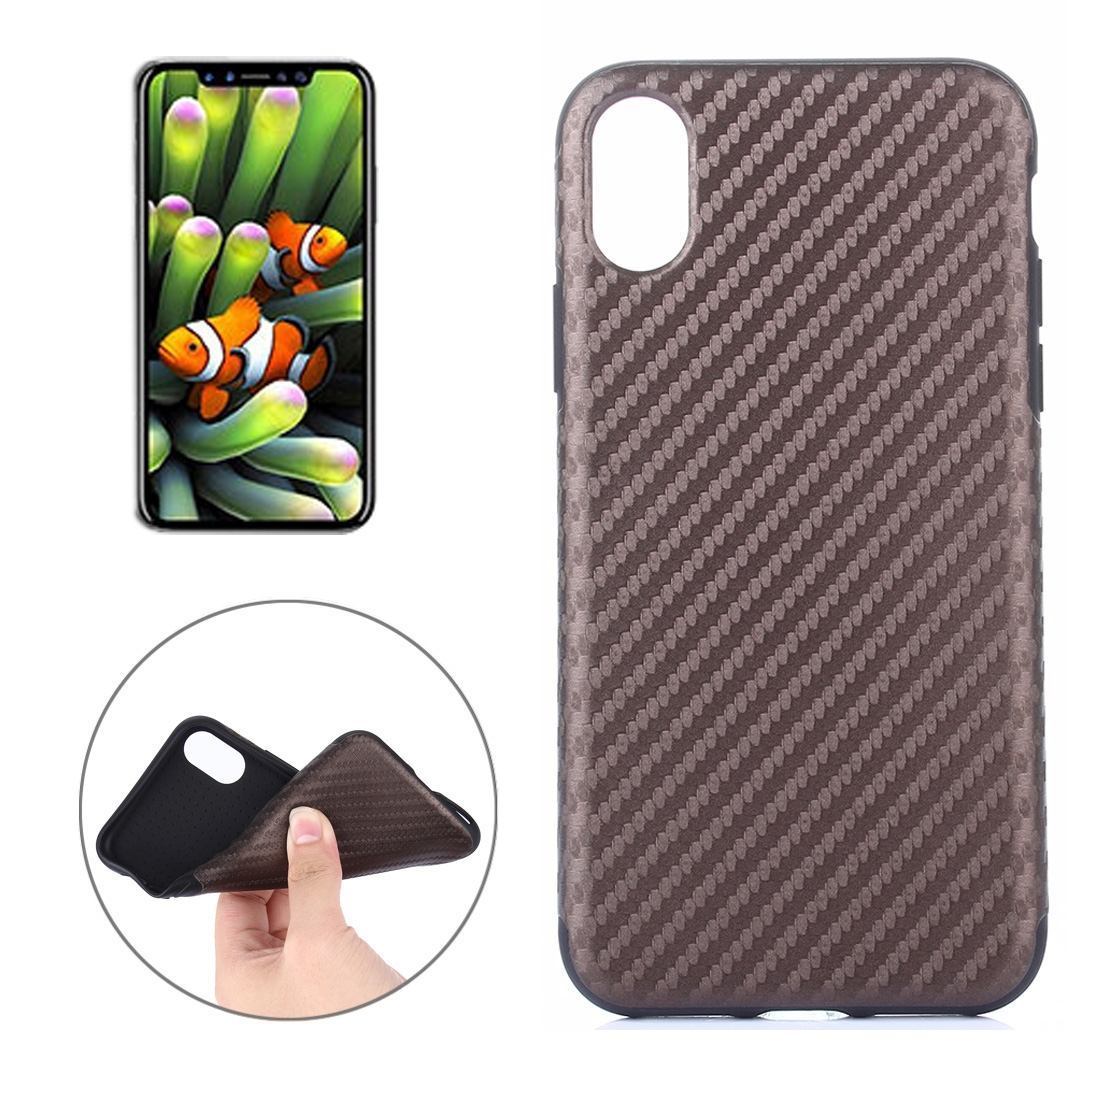 For iPhone XS,X Case,Modern Carbon Fiber Textured Durable Shielding Cover,Brown